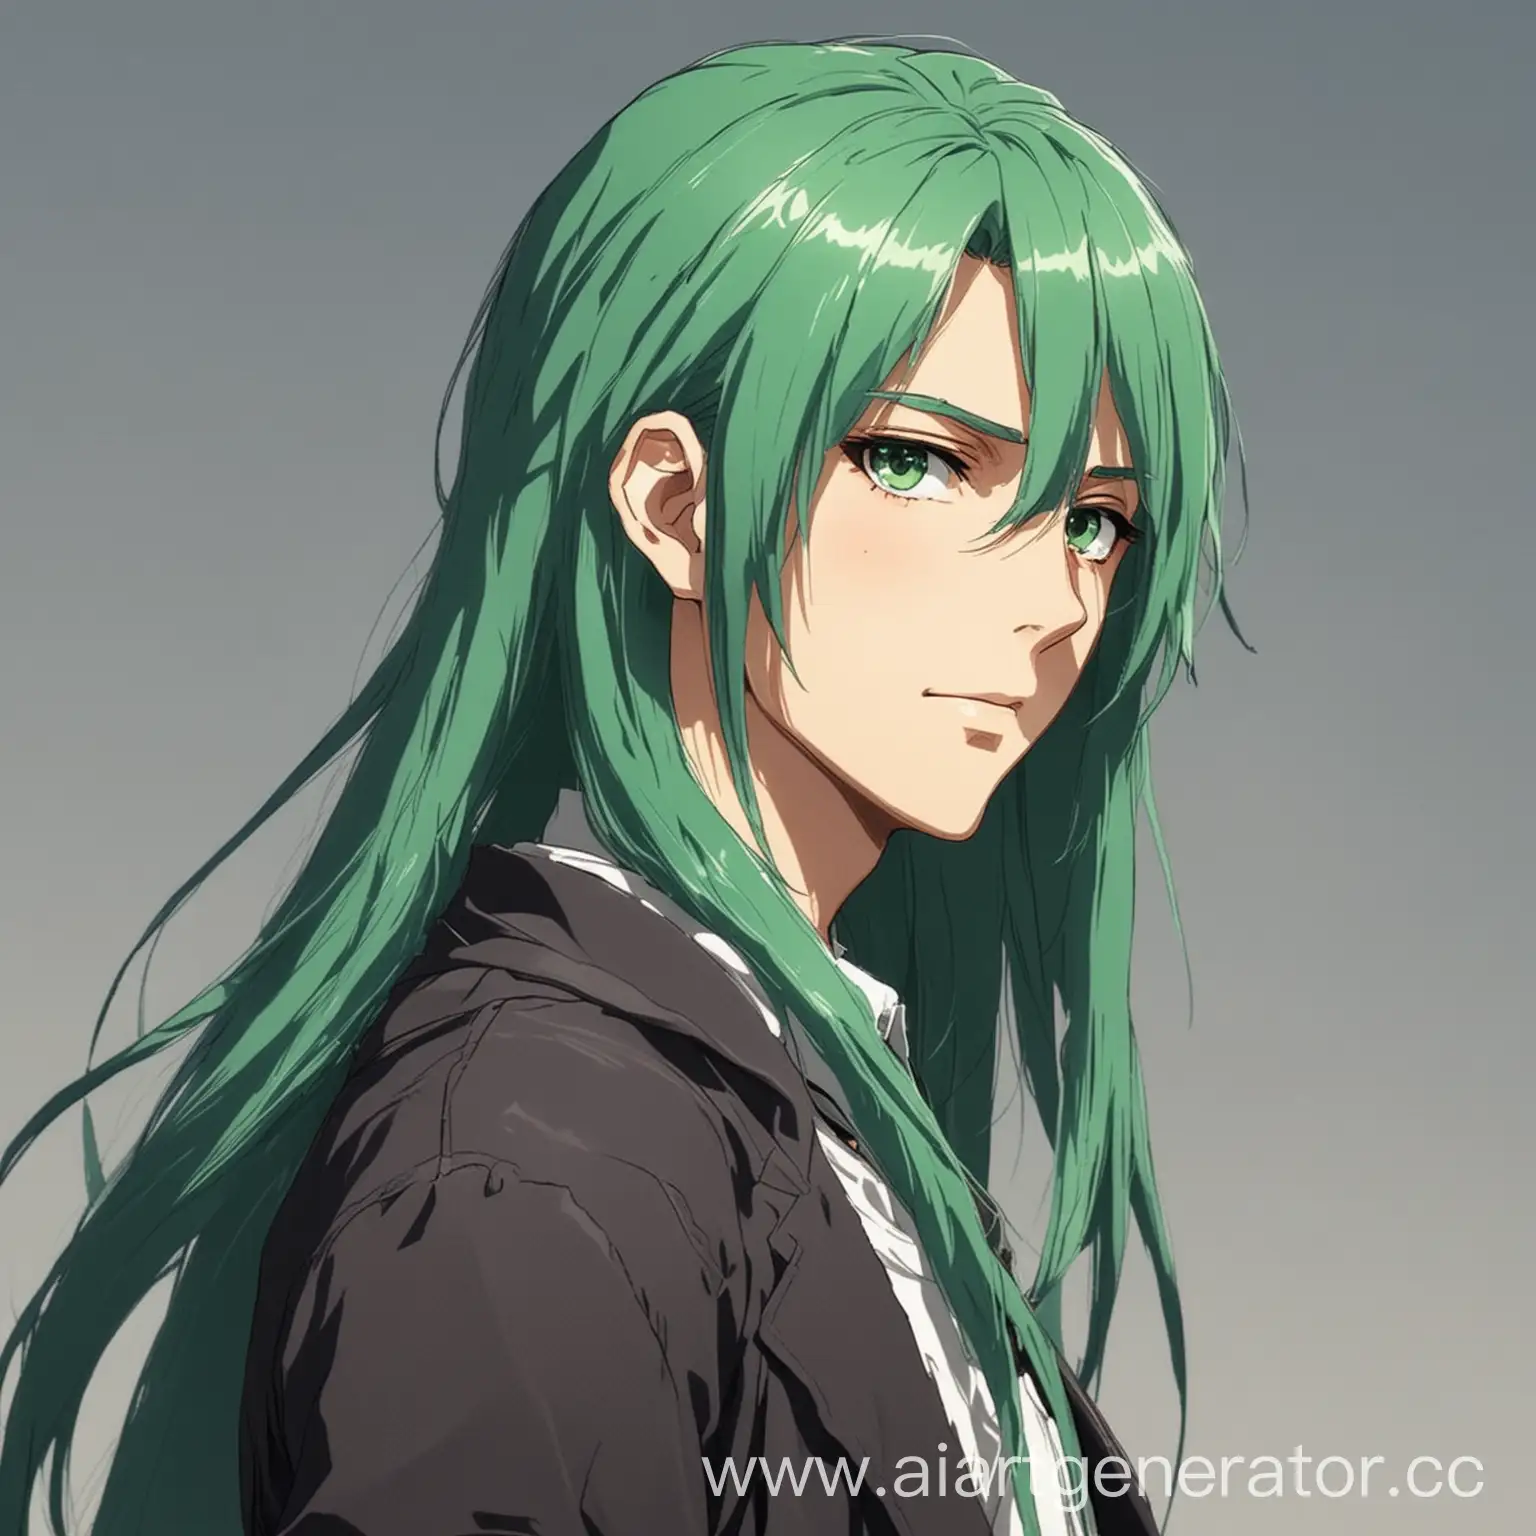 Anime-Character-with-Long-Green-Hair-and-Thin-Physique